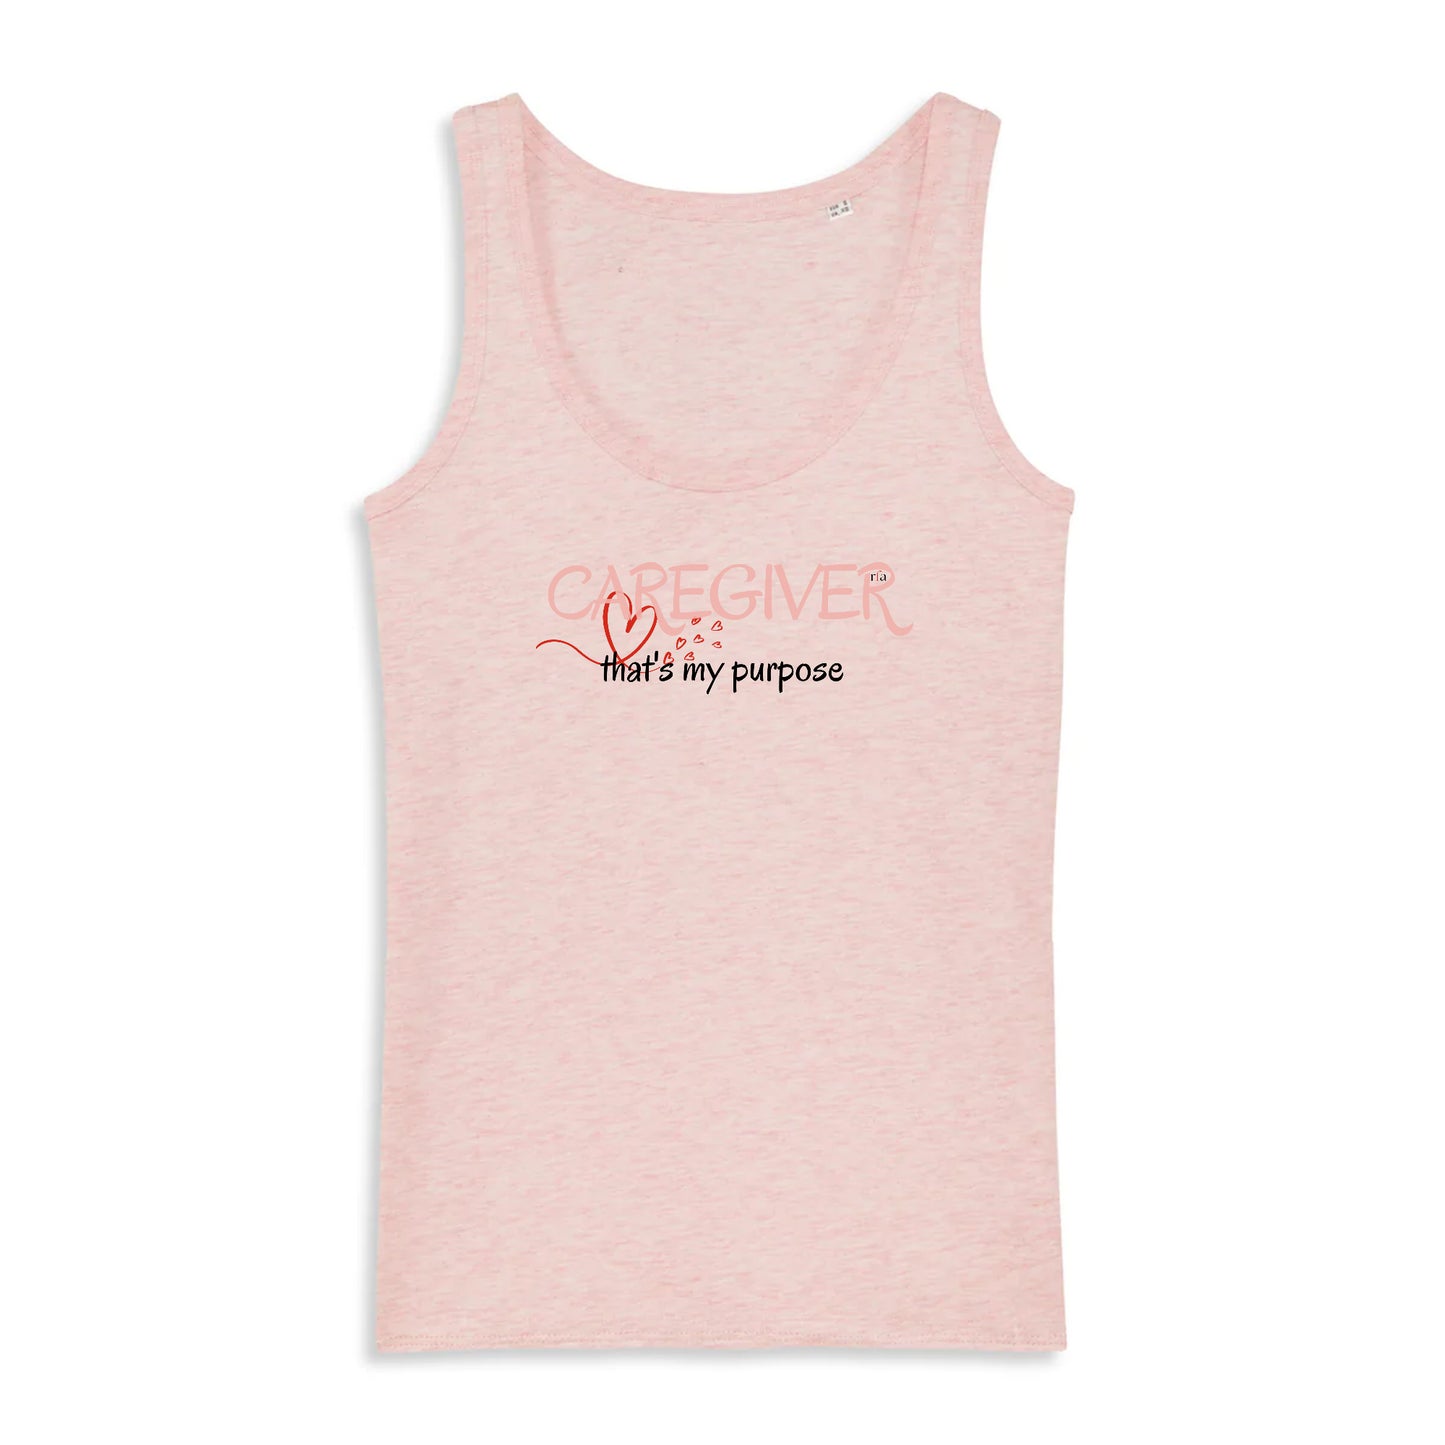 Classic Fitted Tank - CAREGIVER PUR Pink STELLA - 100% Organic Cotton